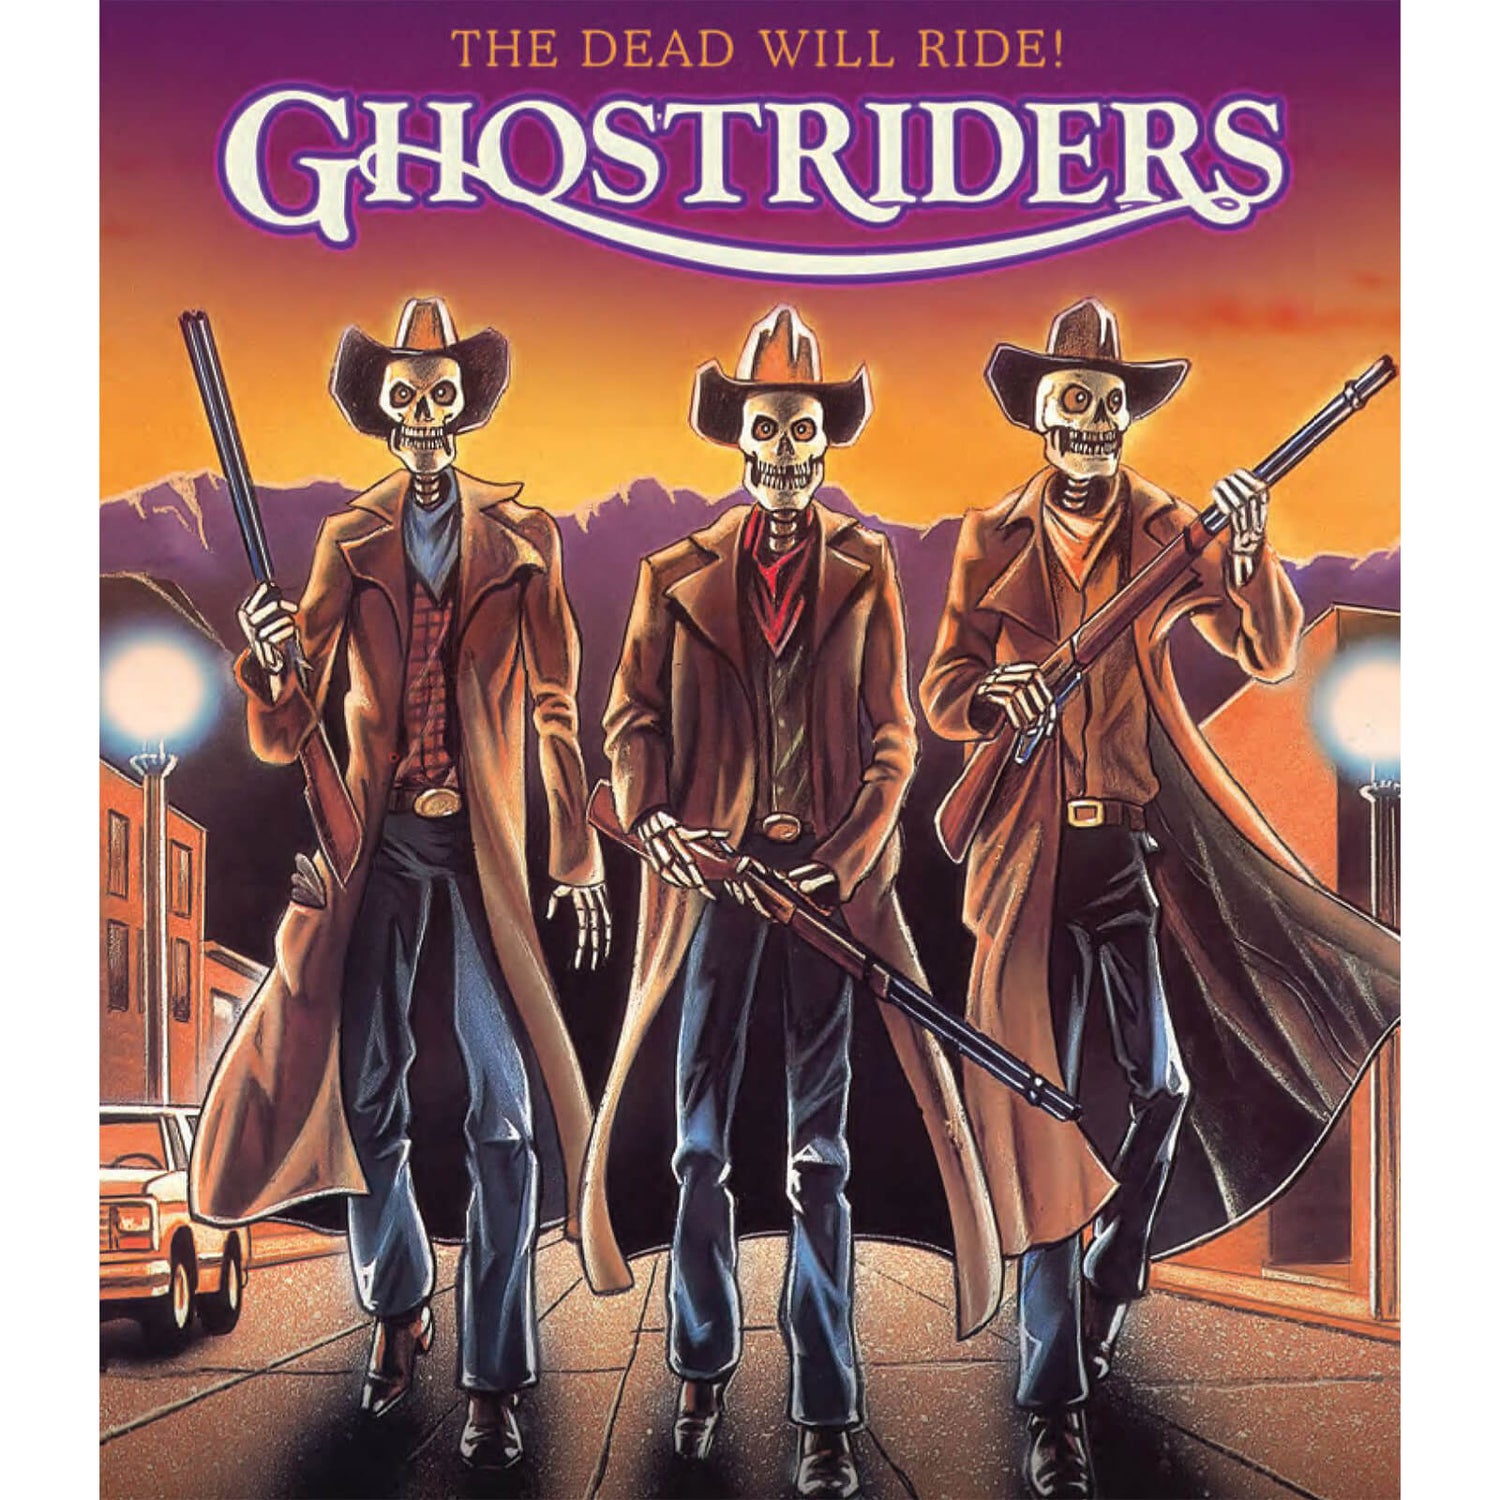 Ghost Riders (US Import)